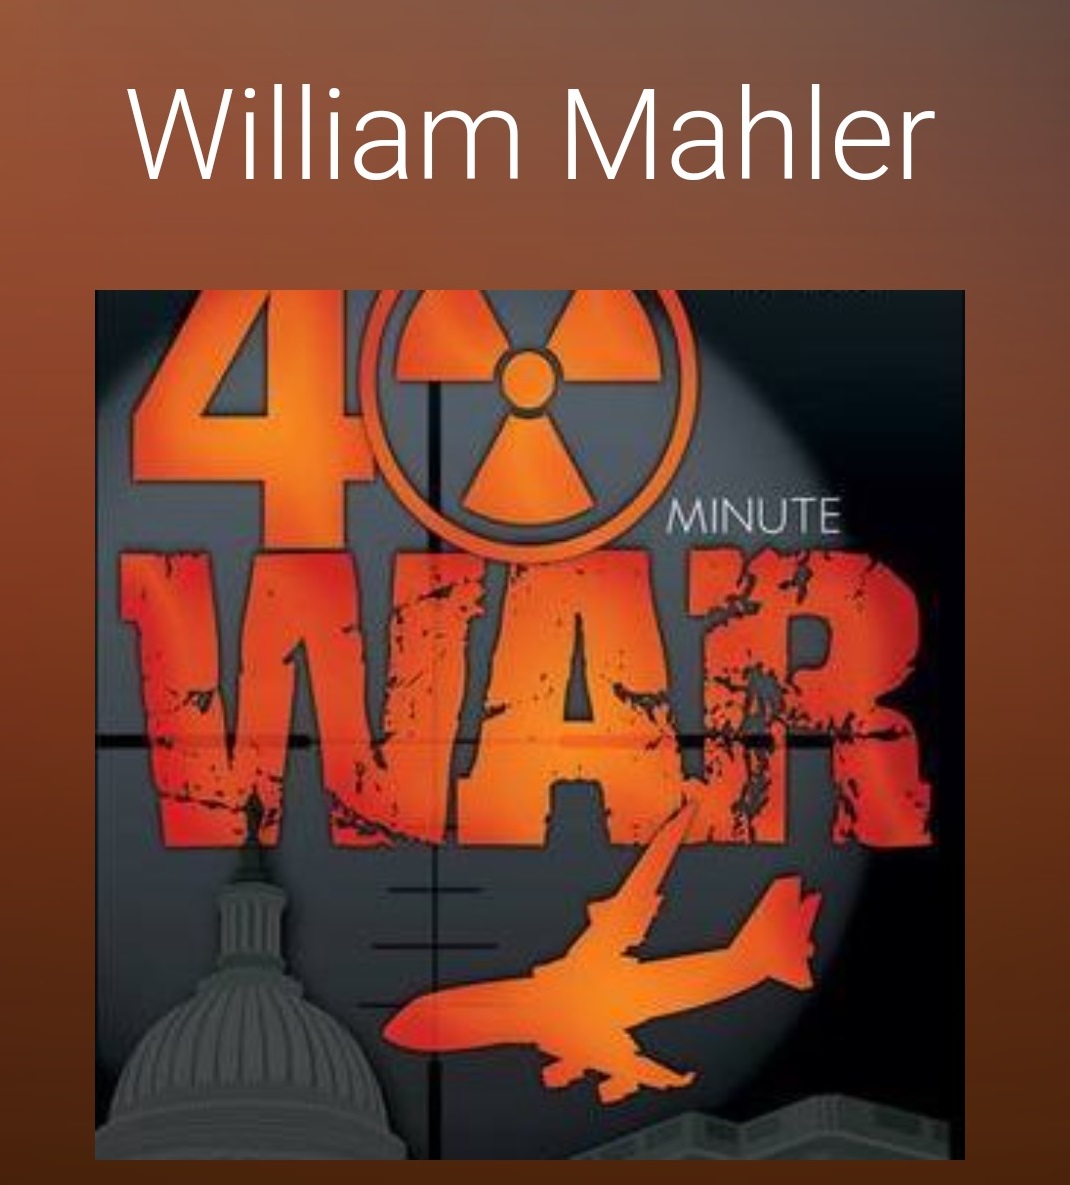 Blending Political Discourse, Conspiracy Theories, and the Aftermath of a Tragic Day in American History: Classified Evidence to Become Available Thanks to Multi-Genre Singer/Songwriter William Mahler